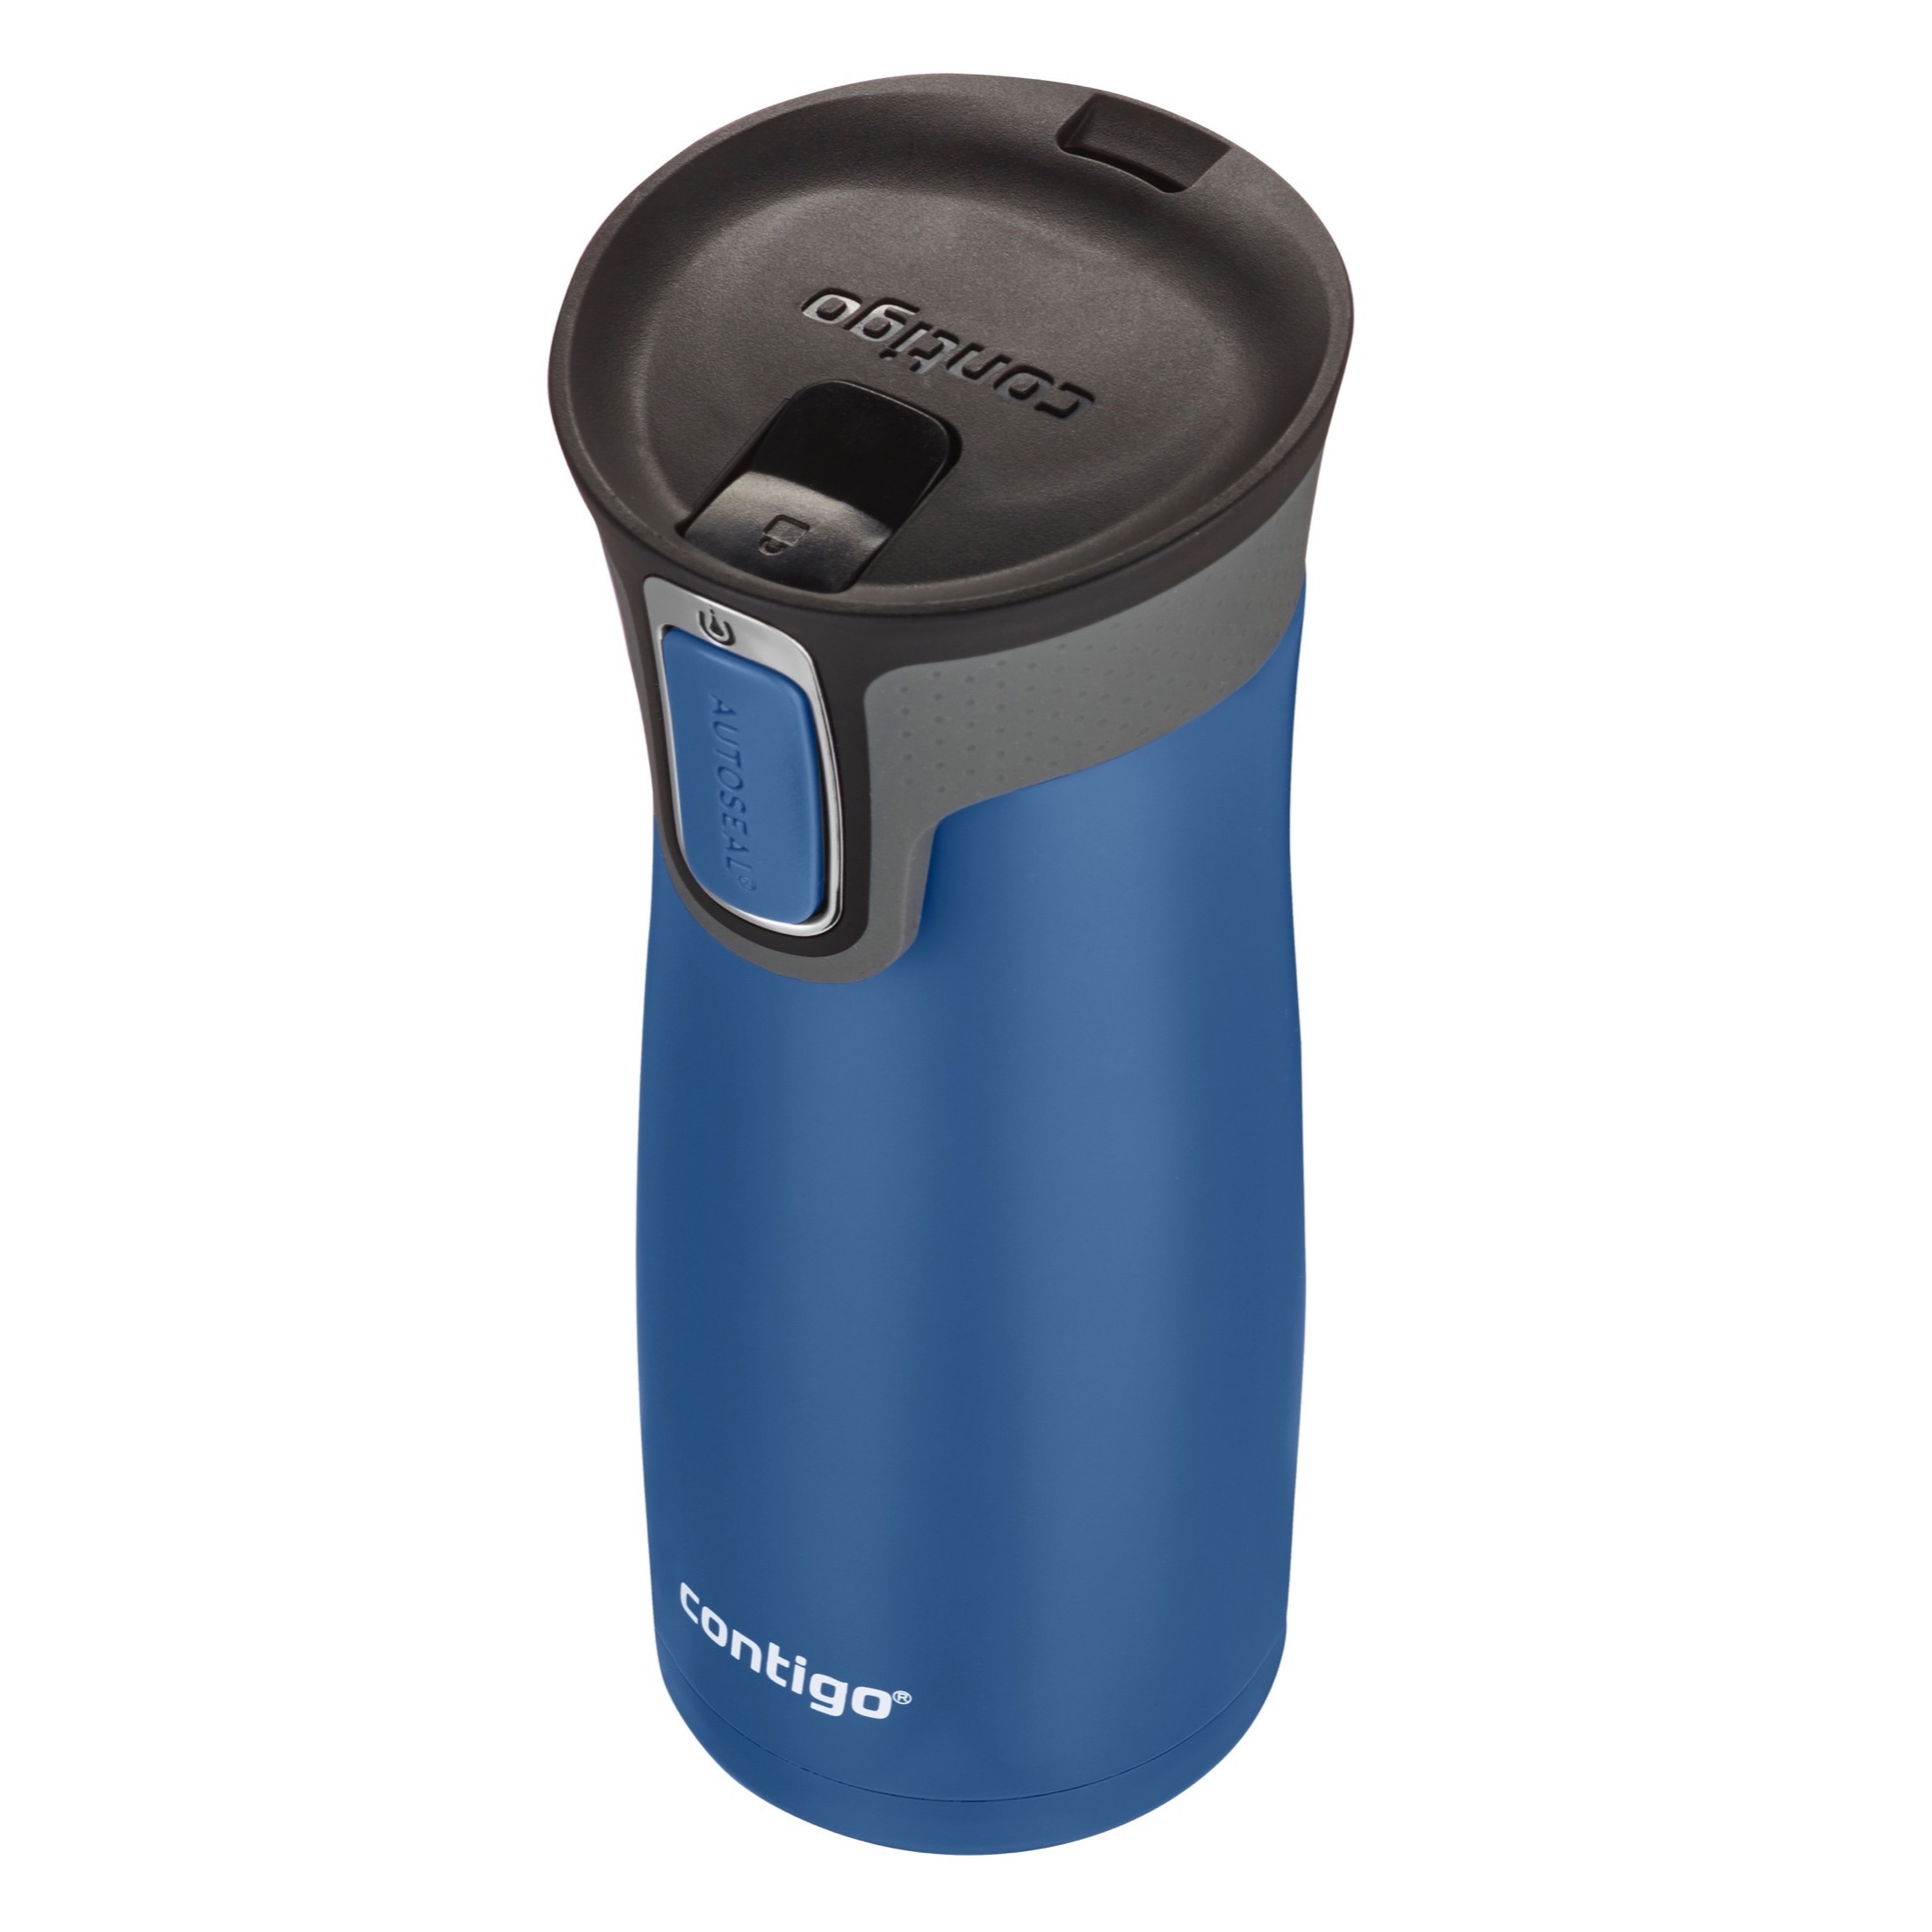 Contigo 16oz Autoseal West Loop Stainless Steel Travel Mug with Easy-Clean Lid, Blue Corn - image 2 of 2